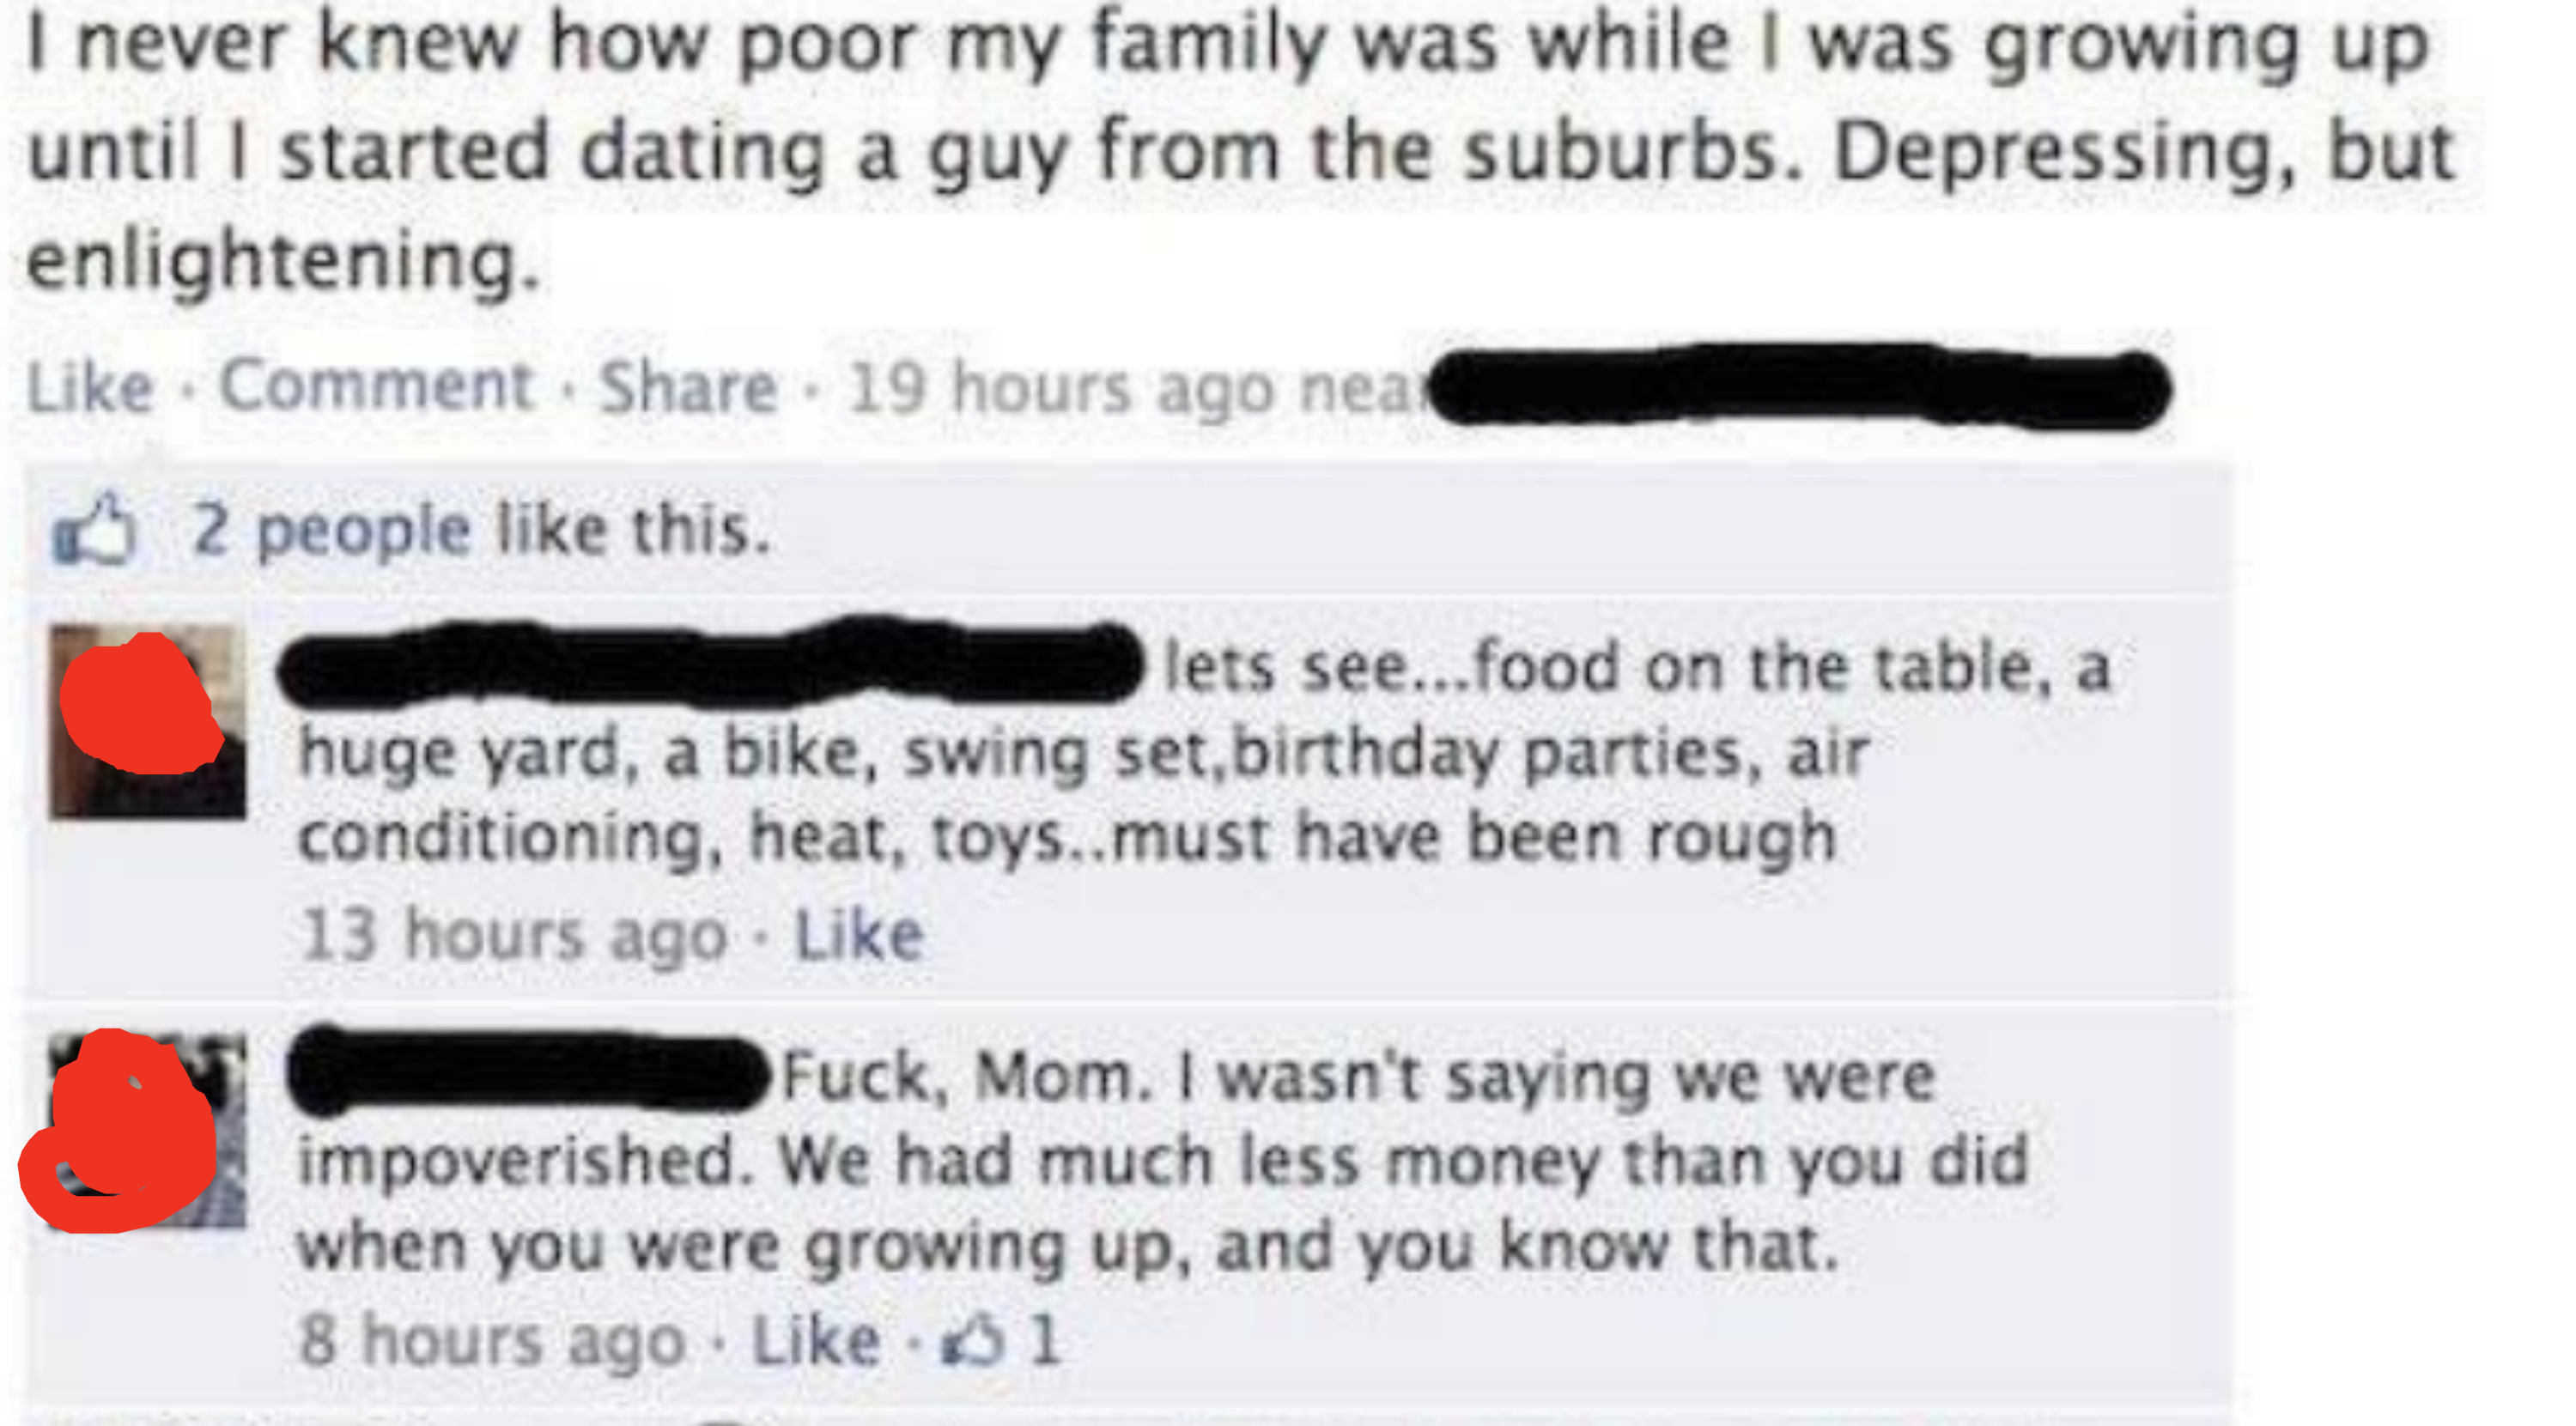 A Facebook post says they didn&#x27;t realize they grew up poor until meeting their boyfriend, and the poster&#x27;s mother responds that the poster grew up with &quot;a huge yard, bike, swing set, birthday parties, air conditioning, heat, toys&quot;